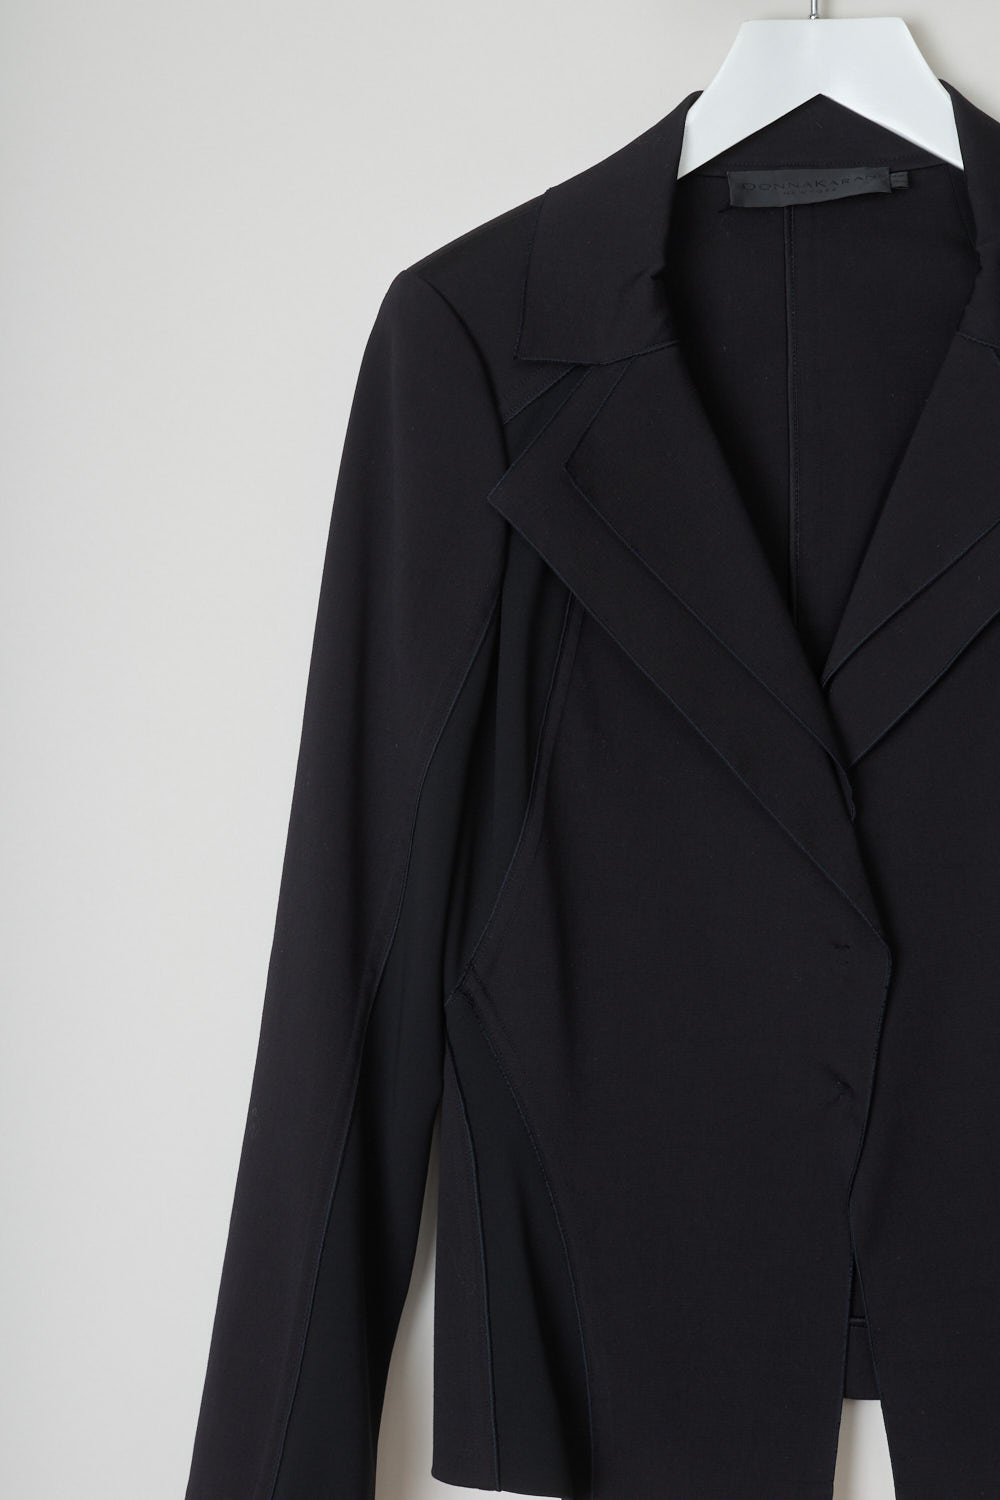 Donna Karan, black double lapel jacket, A42J238073_001_black, black, detail, Black jacket comes with a pointed collar and double lapels. Featuring long sleeves and has backing buttons on the front as your closure option. This jacket is made up from two kinds of fabrics a stretchy kind and a regular kind, and placed in a certain way where the jacket stretches where needed. 